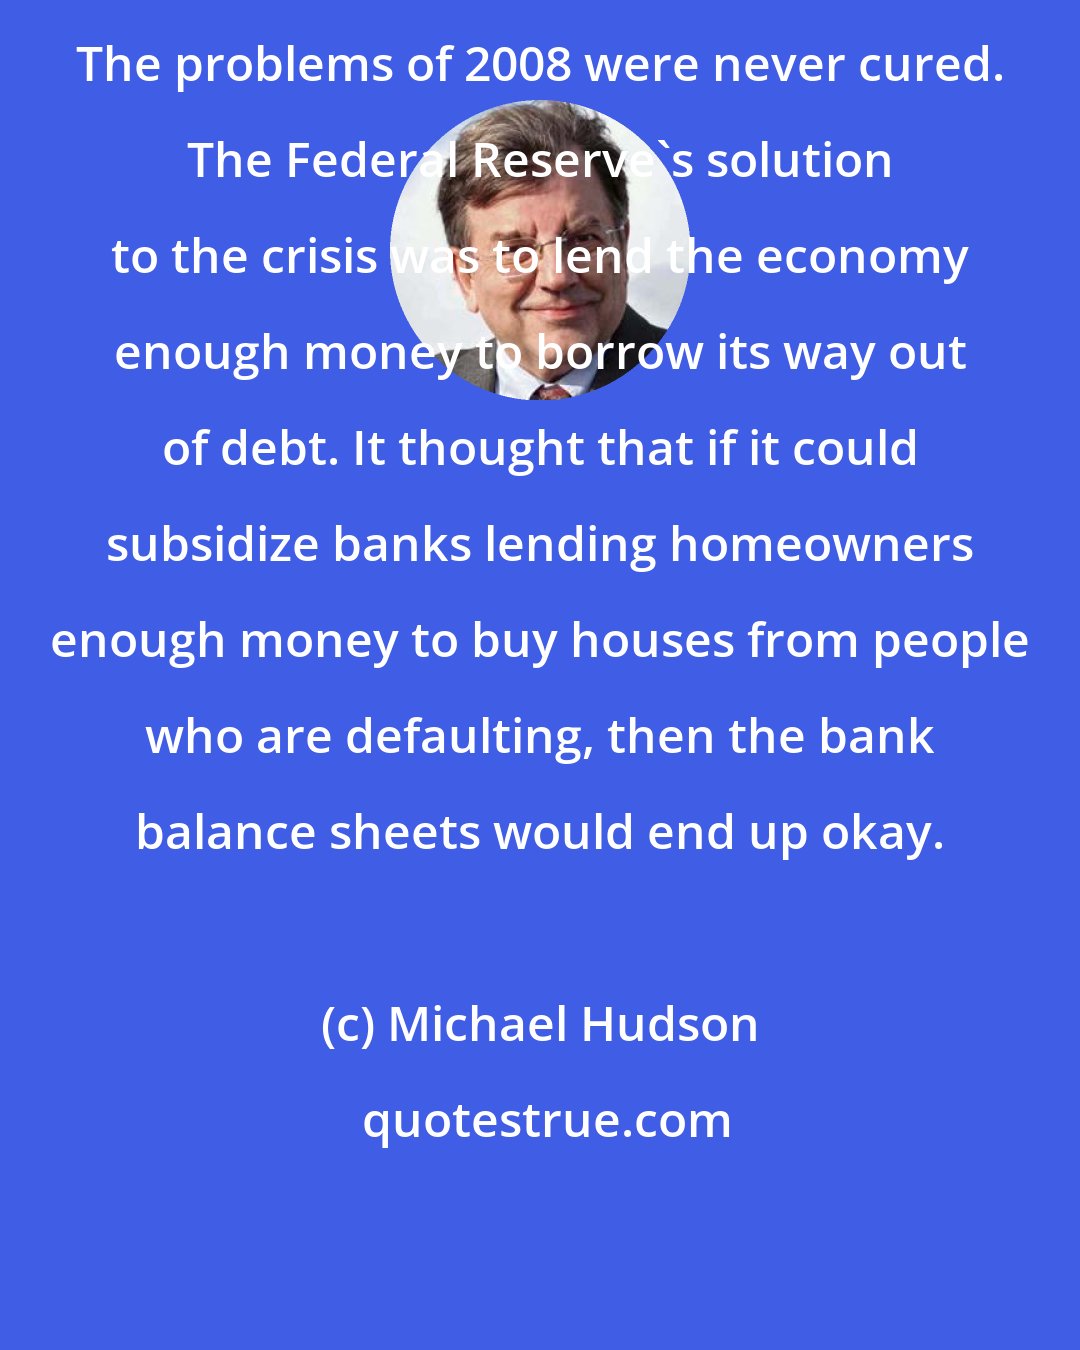 Michael Hudson: The problems of 2008 were never cured. The Federal Reserve's solution to the crisis was to lend the economy enough money to borrow its way out of debt. It thought that if it could subsidize banks lending homeowners enough money to buy houses from people who are defaulting, then the bank balance sheets would end up okay.